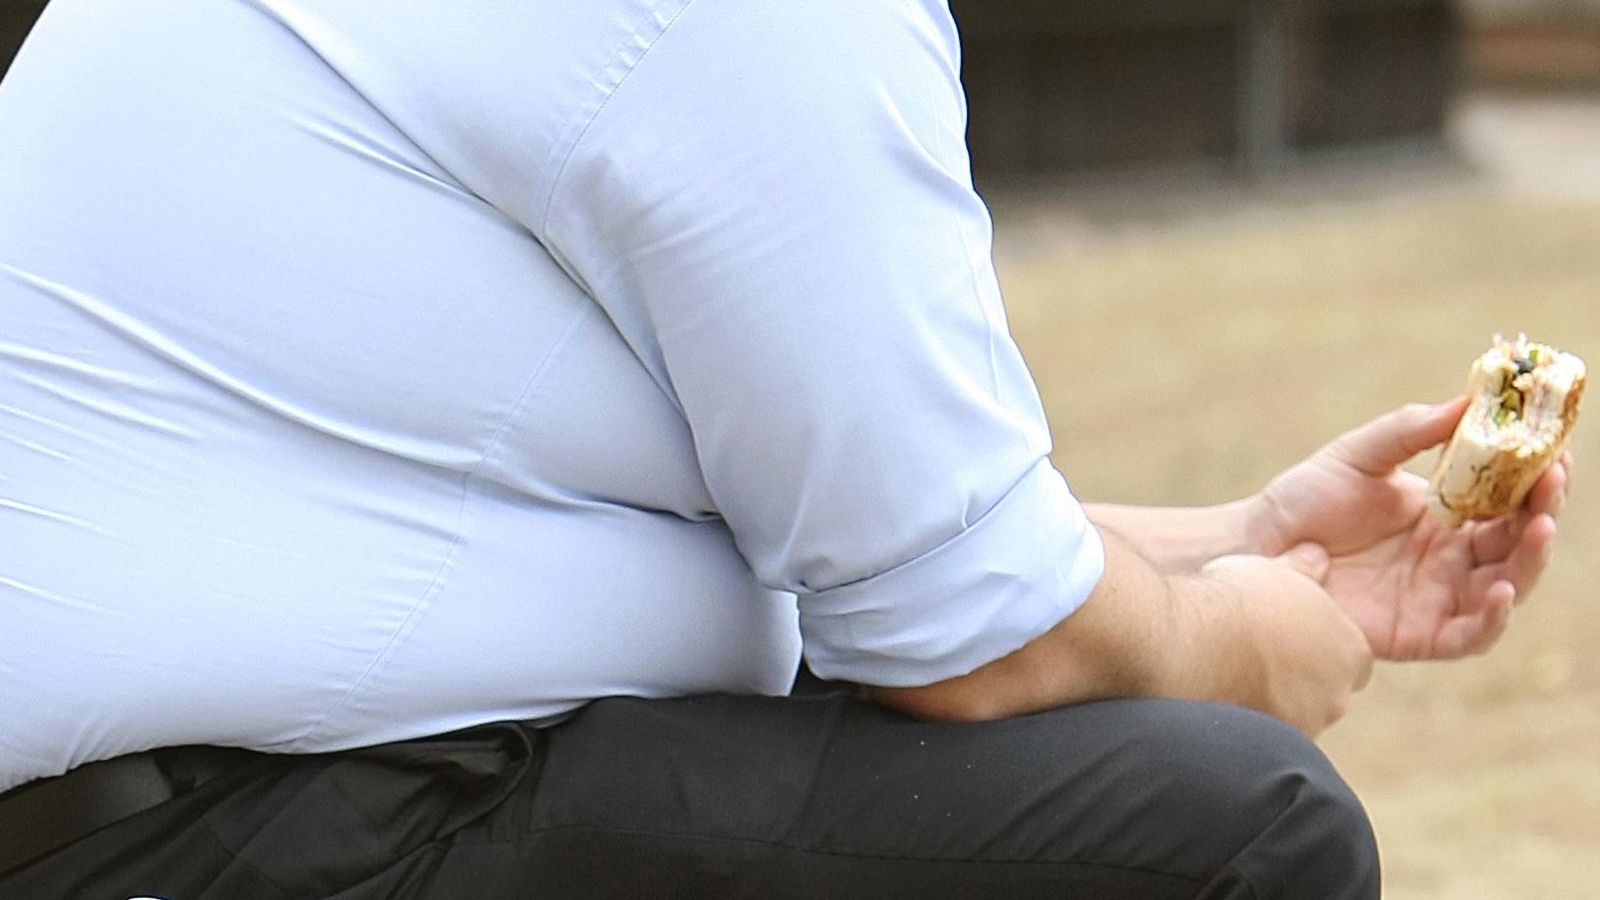 £40m pilot scheme launched to increase access to weight-loss drugs and cut NHS waiting lists